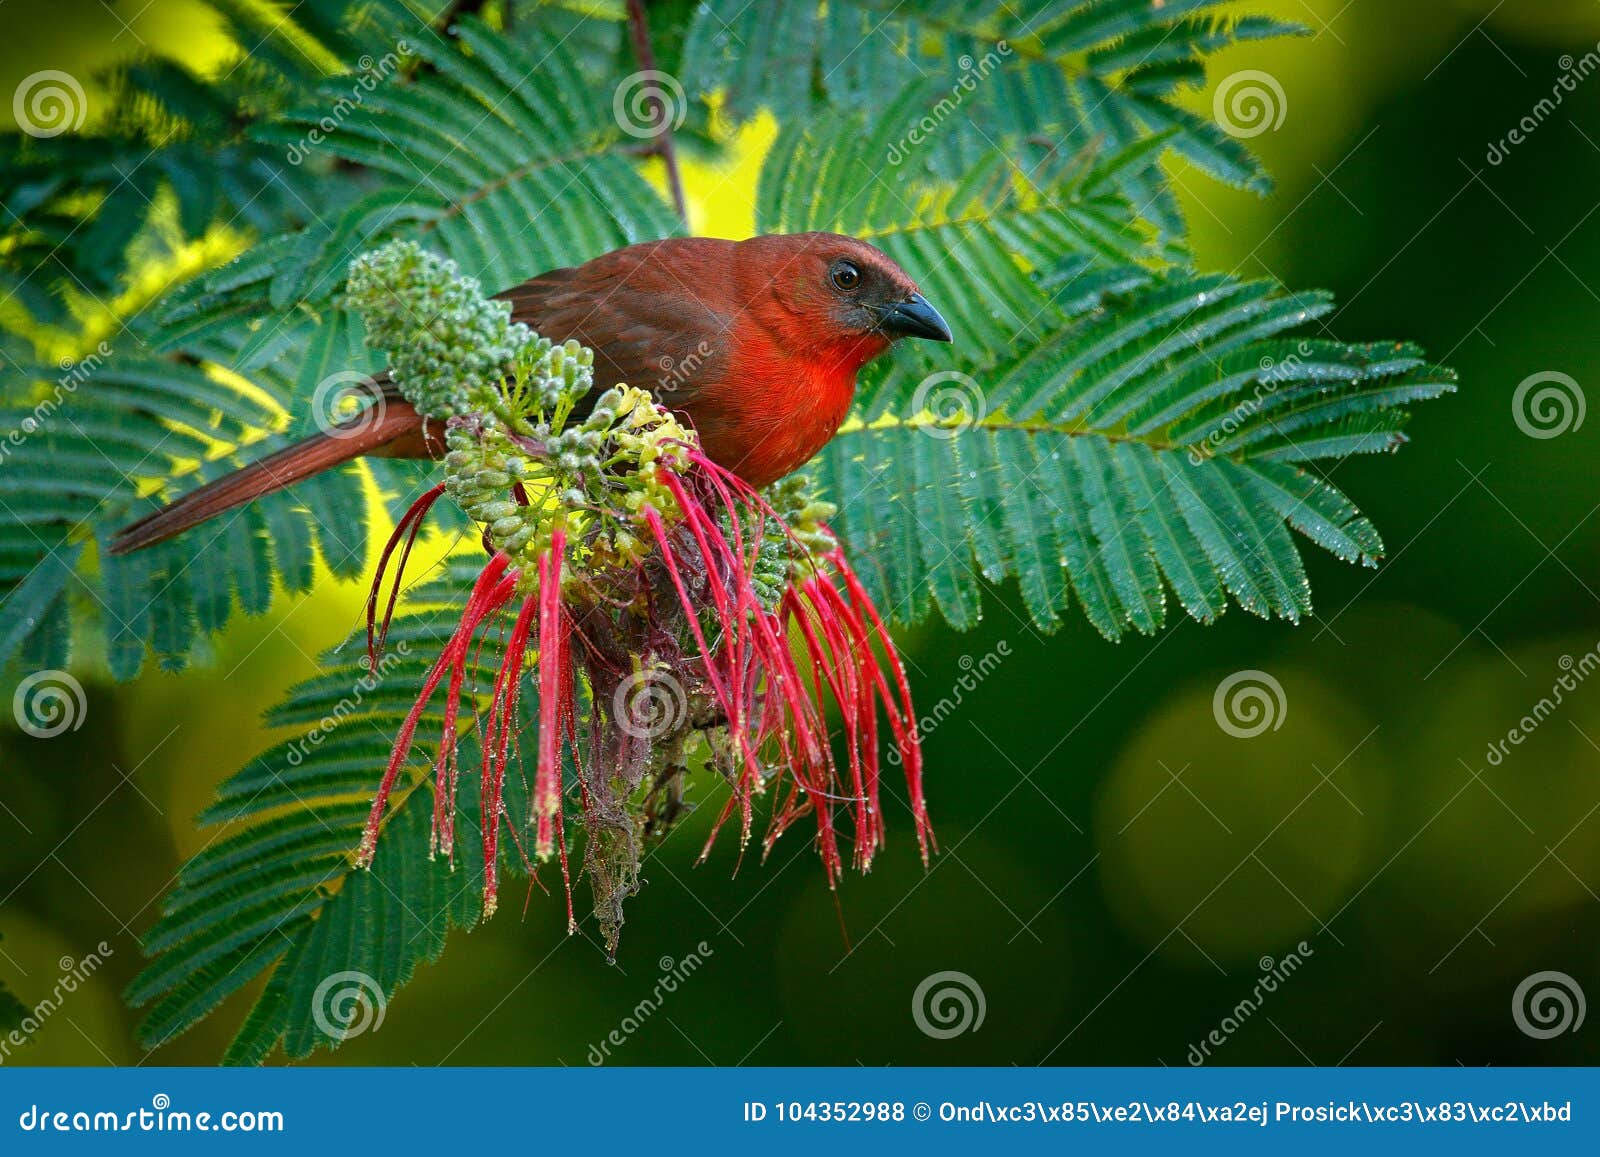 red-throated ant-tanager, habia fuscicauda, red bird in the nature habitat. tanager sitting on the green palm tree. birdwatching i